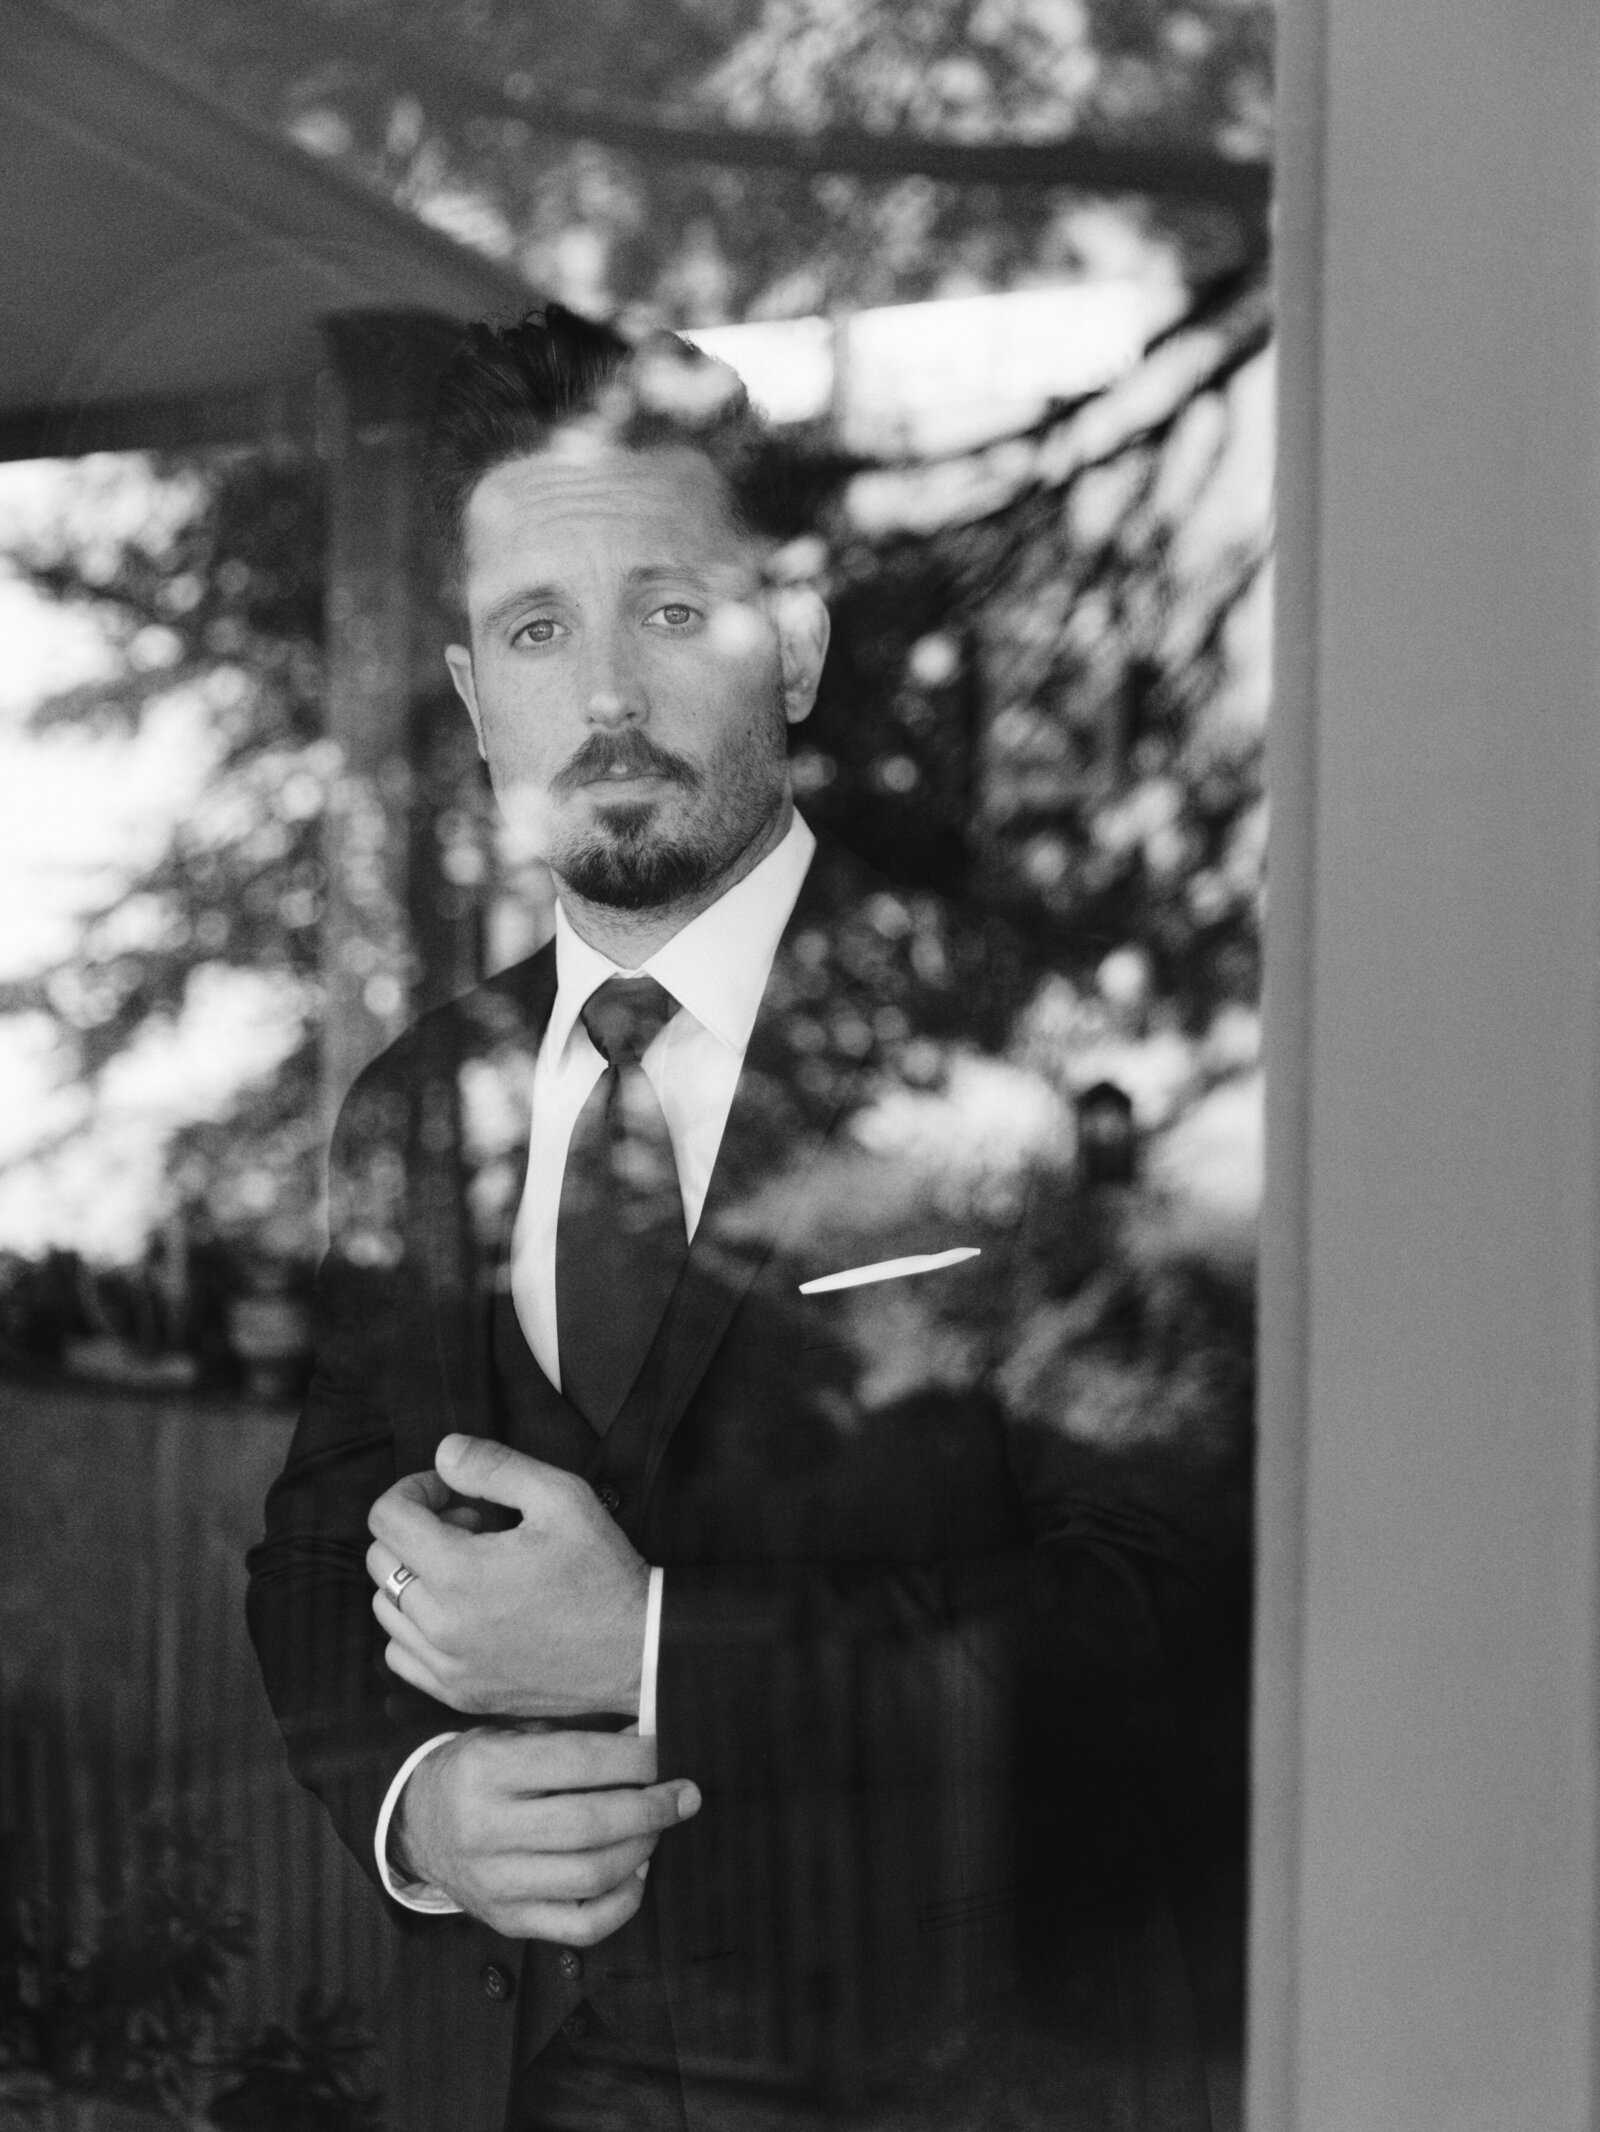 101-For-the-Love-of-It-Groom-Portrait-Reflection